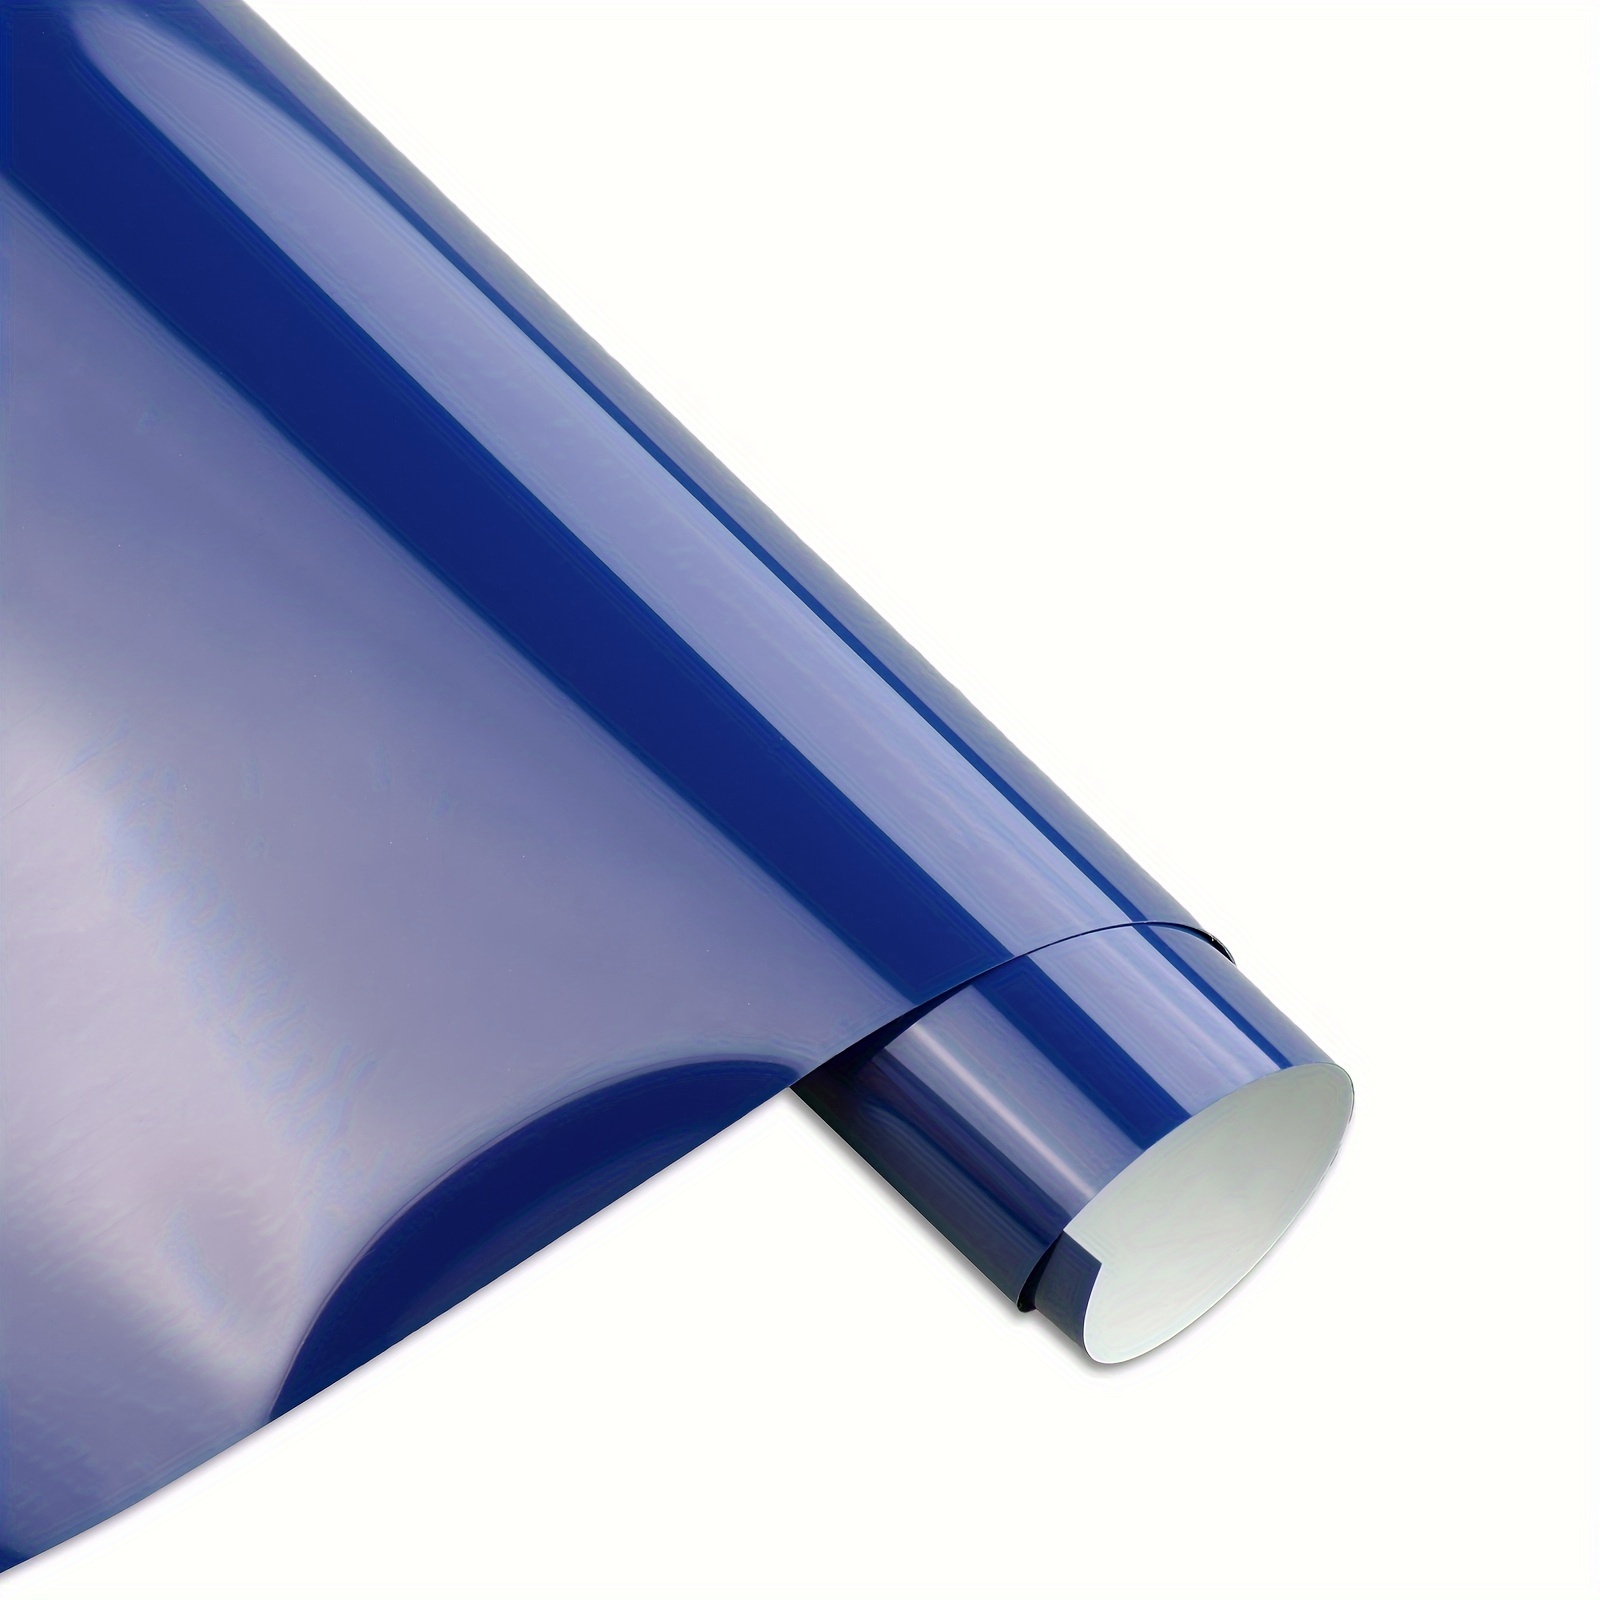 Blue Heat Transfer Vinyl Roll, 12 x 35ft Blue Iron on Vinyl for Cricut & Cameo, Blue HTV Vinyl Roll for All Cutter Machine Cutting and Weeding